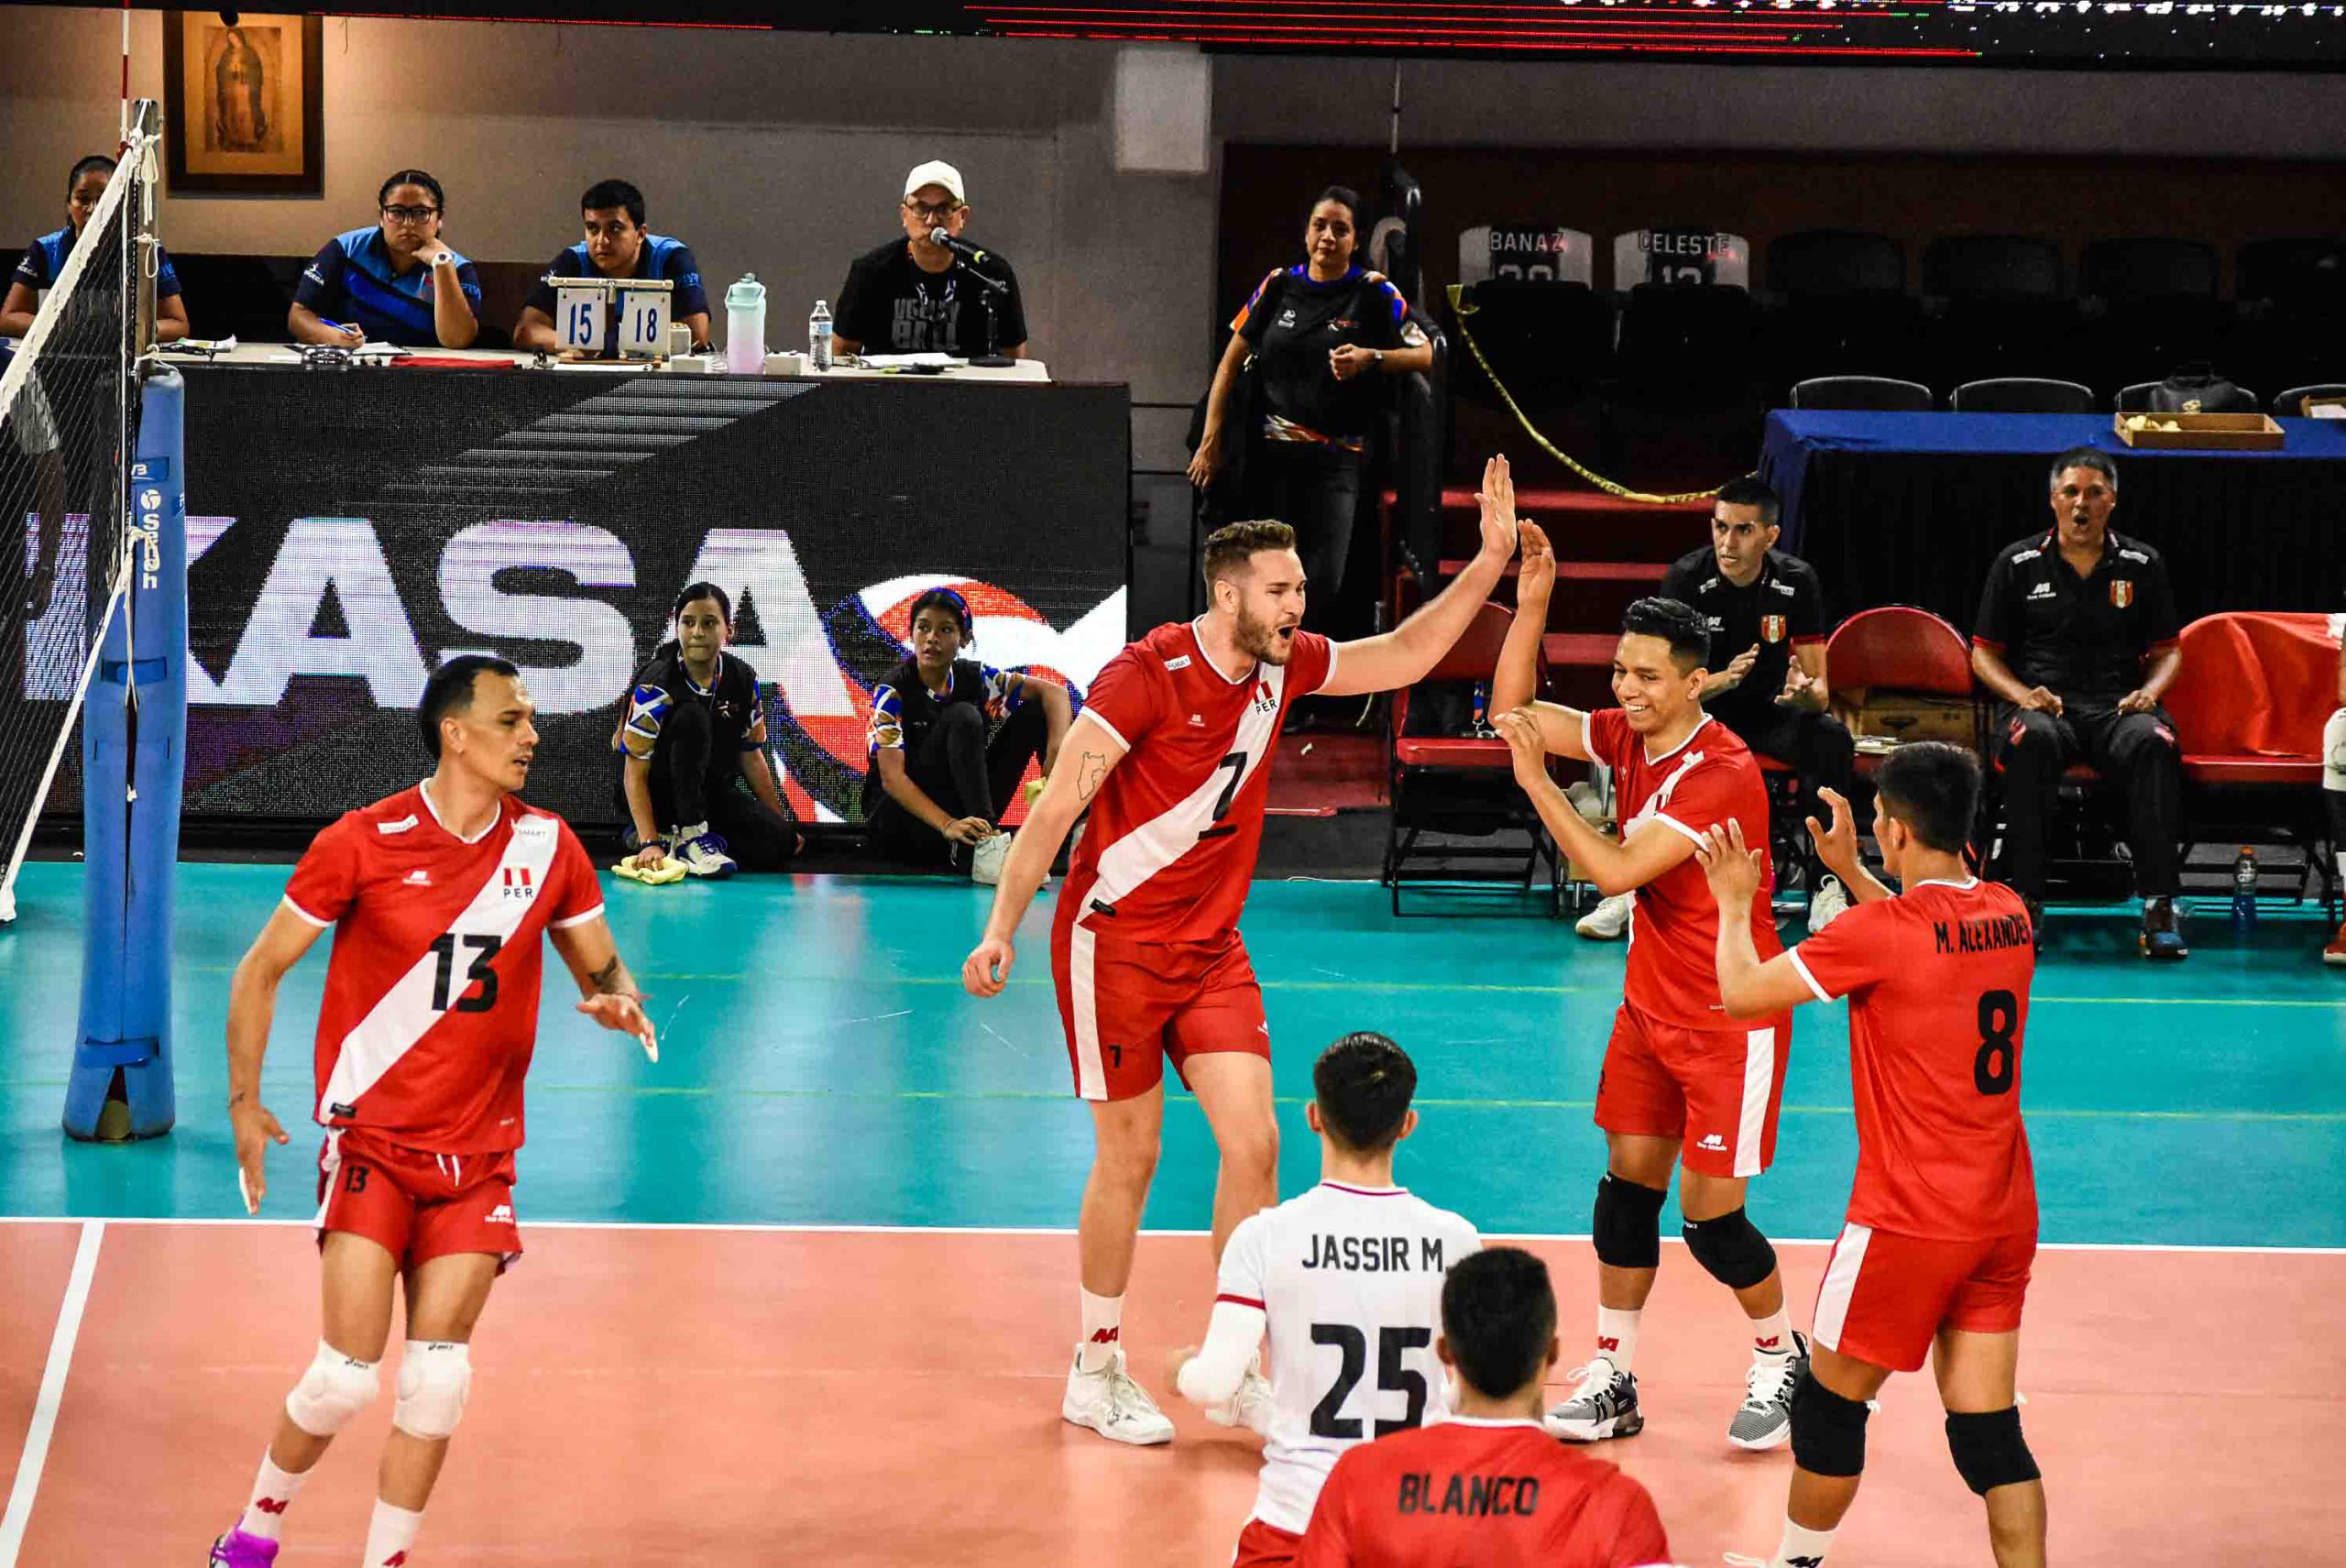 Peru beats Cuba in five sets for seventh place at the Pan American Cup